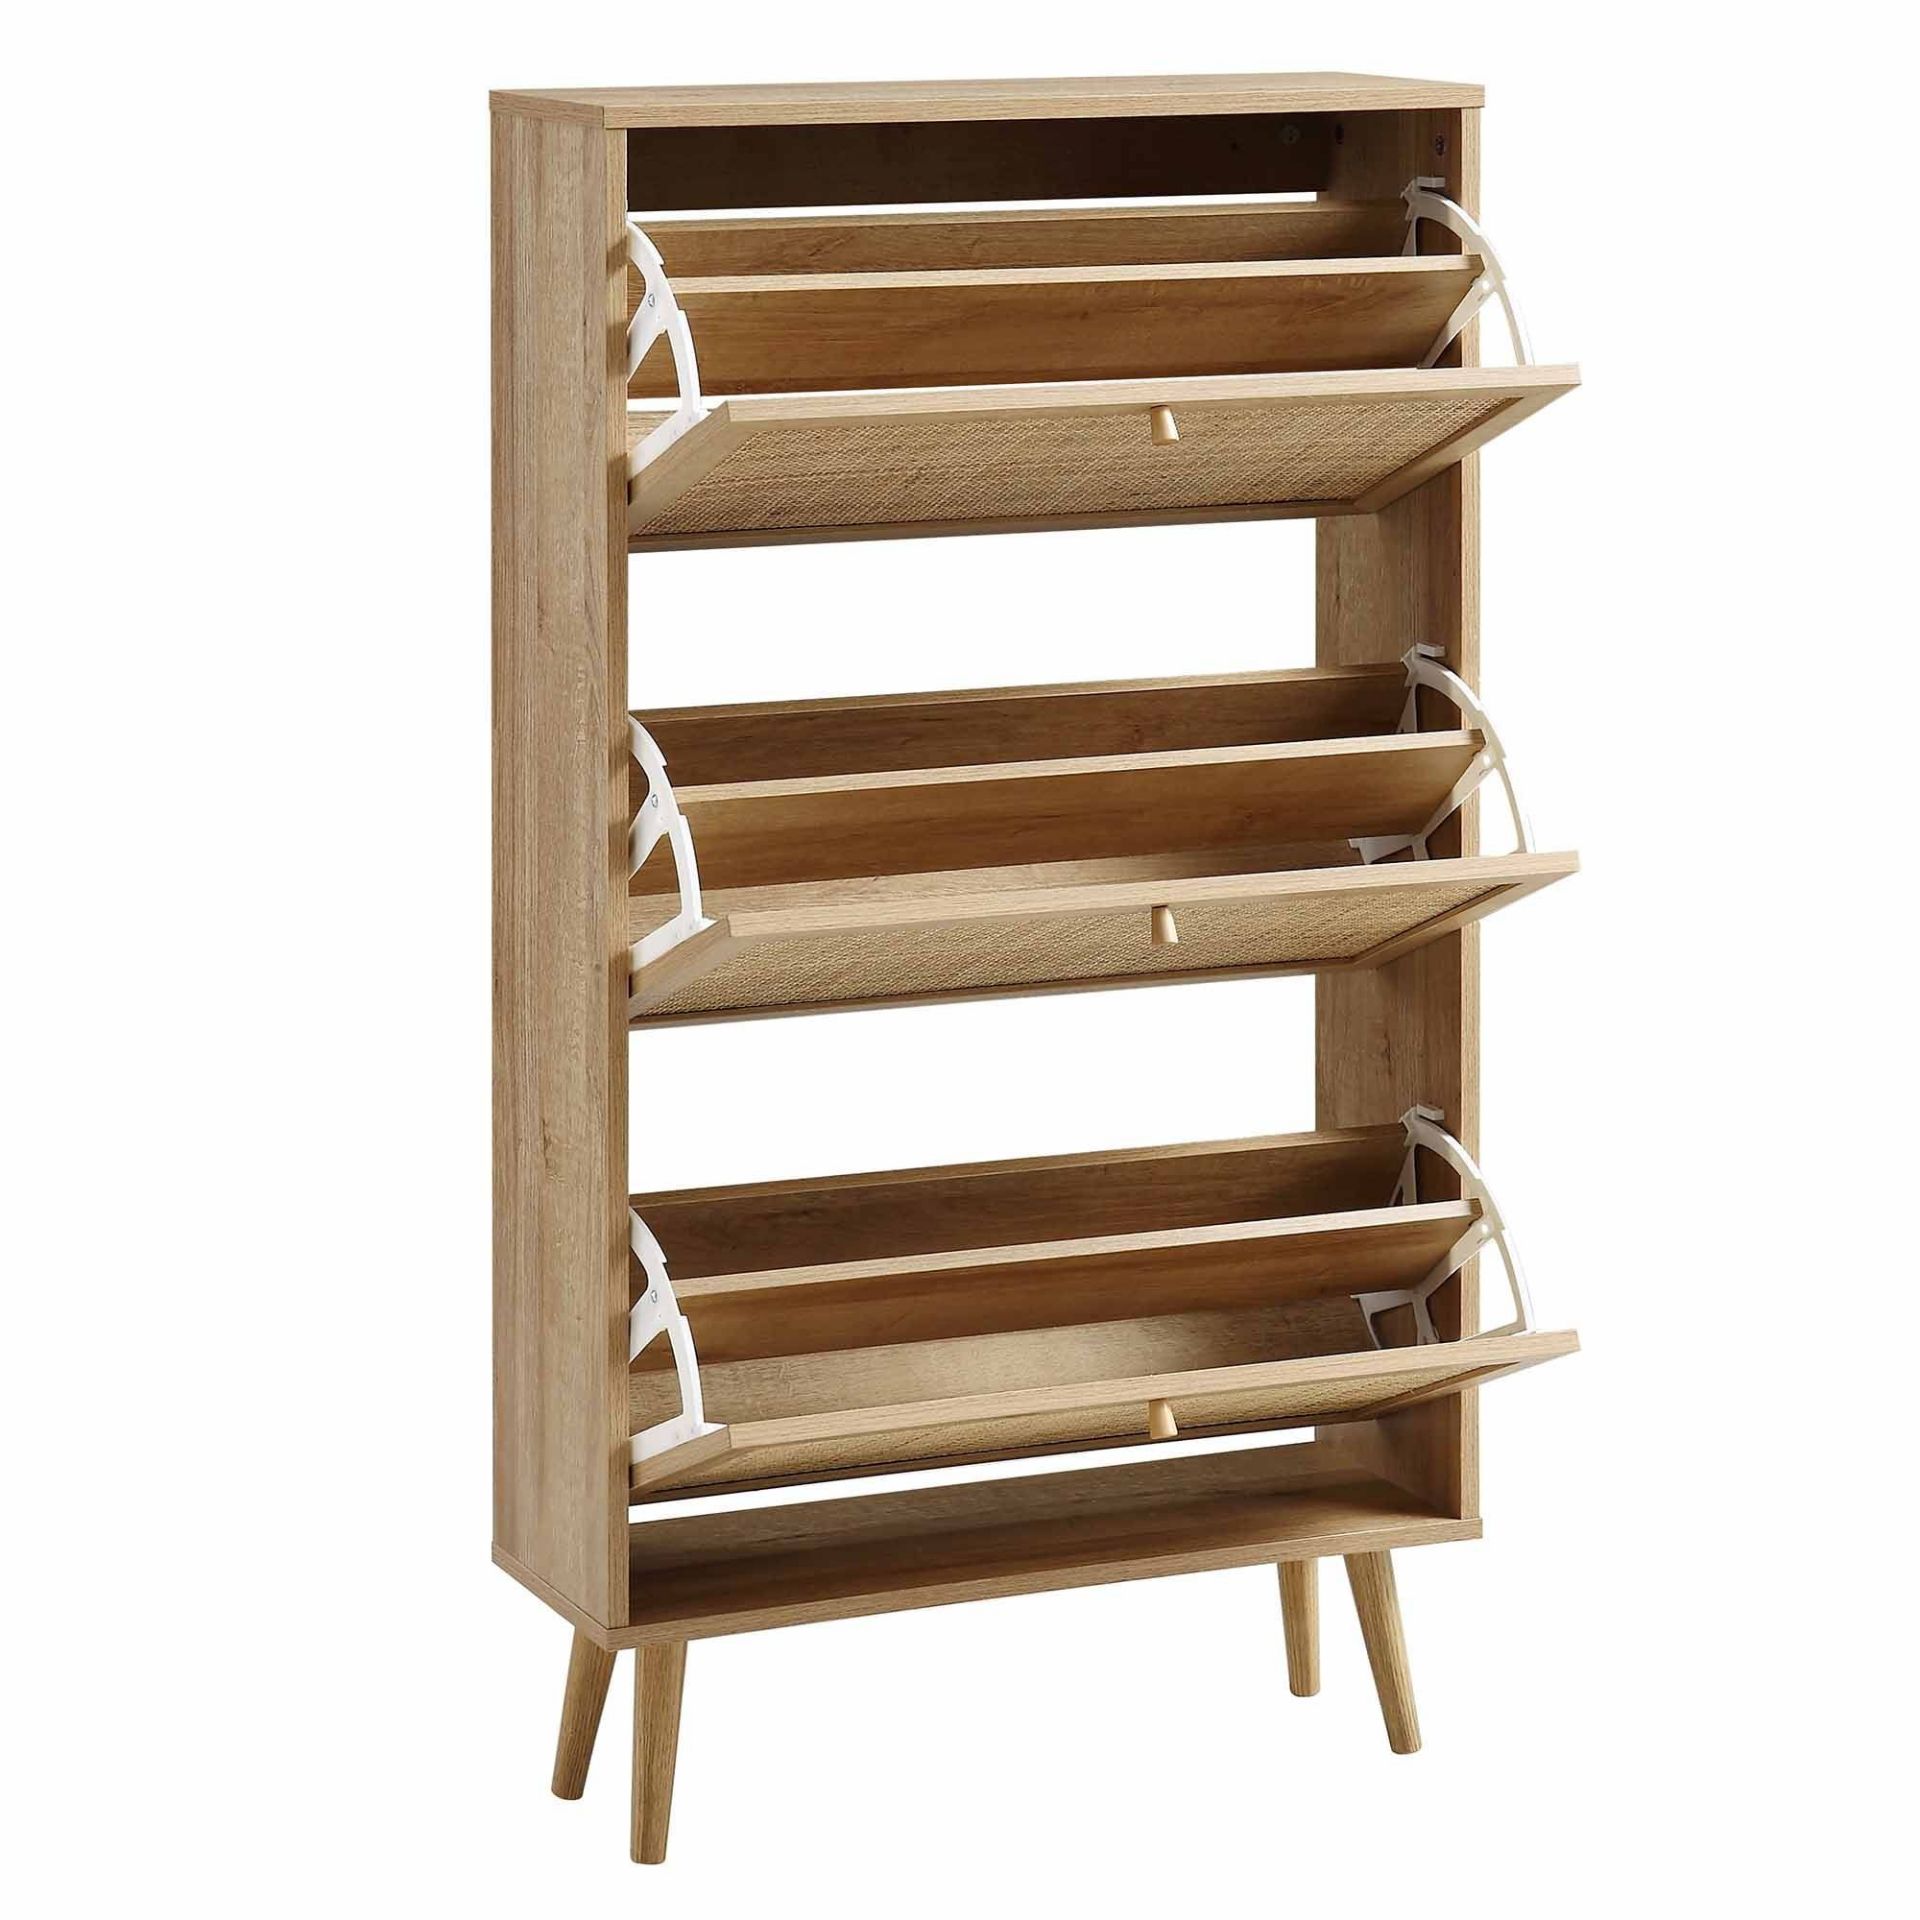 Frances Rattan 3 Tier Shoe Storage Cabinet, Natural. - R19.5. RRP £239.99. The cabinet has 3 tiers - Image 3 of 4